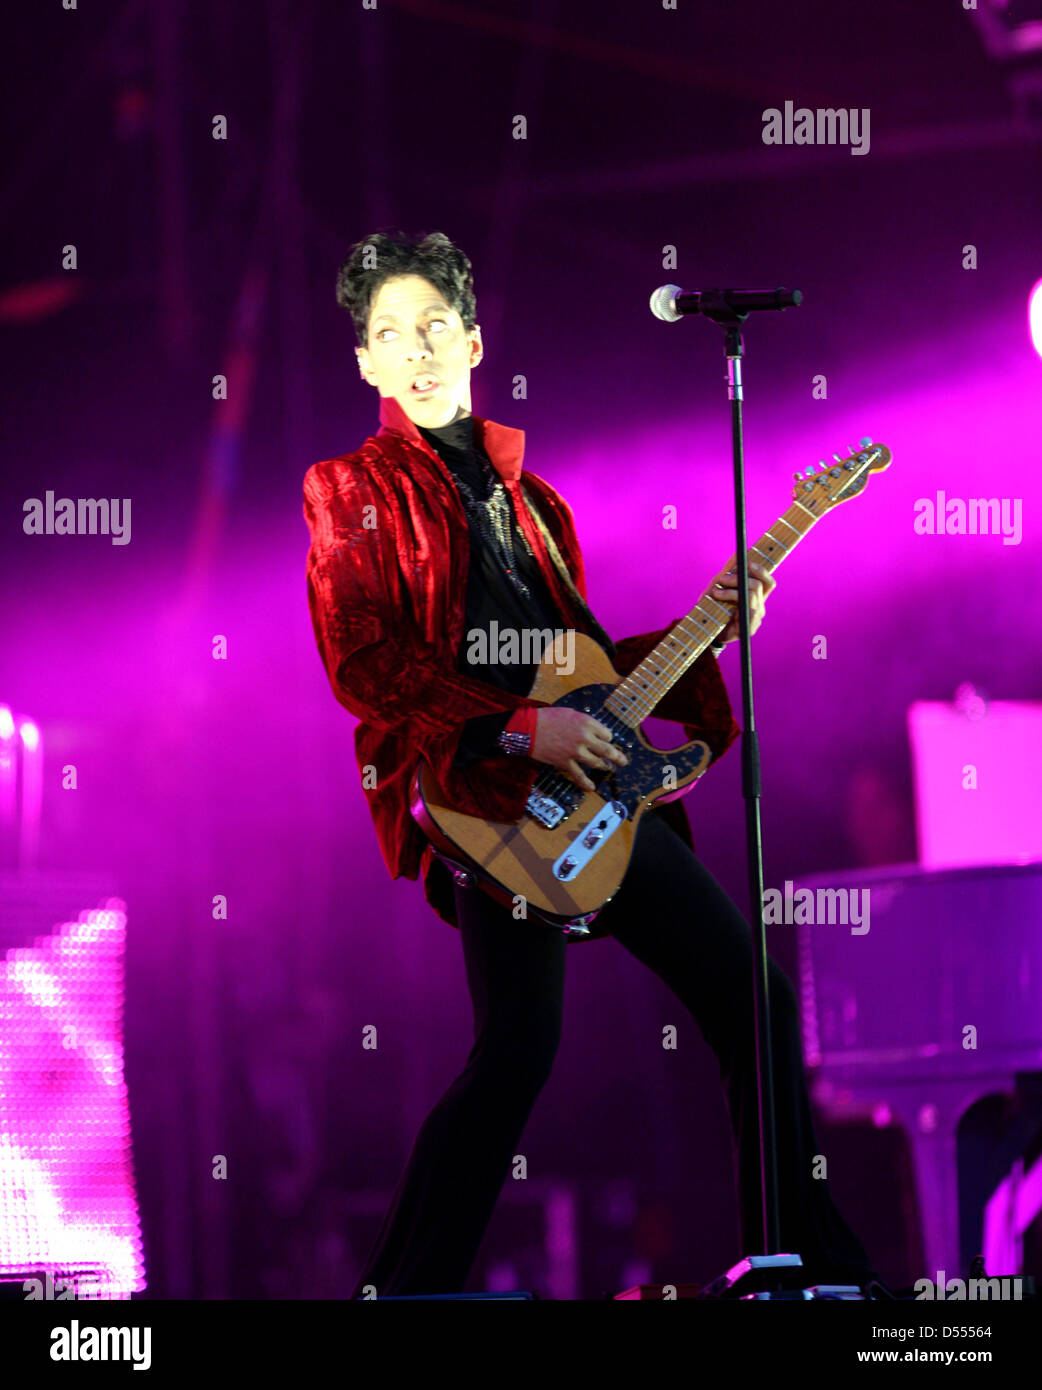 The rock/ pop/ funk musician Prince in concert at the annual Sziget Festival in Budapest, Hungary, on Tuesday, August 9, 2011. Stock Photo